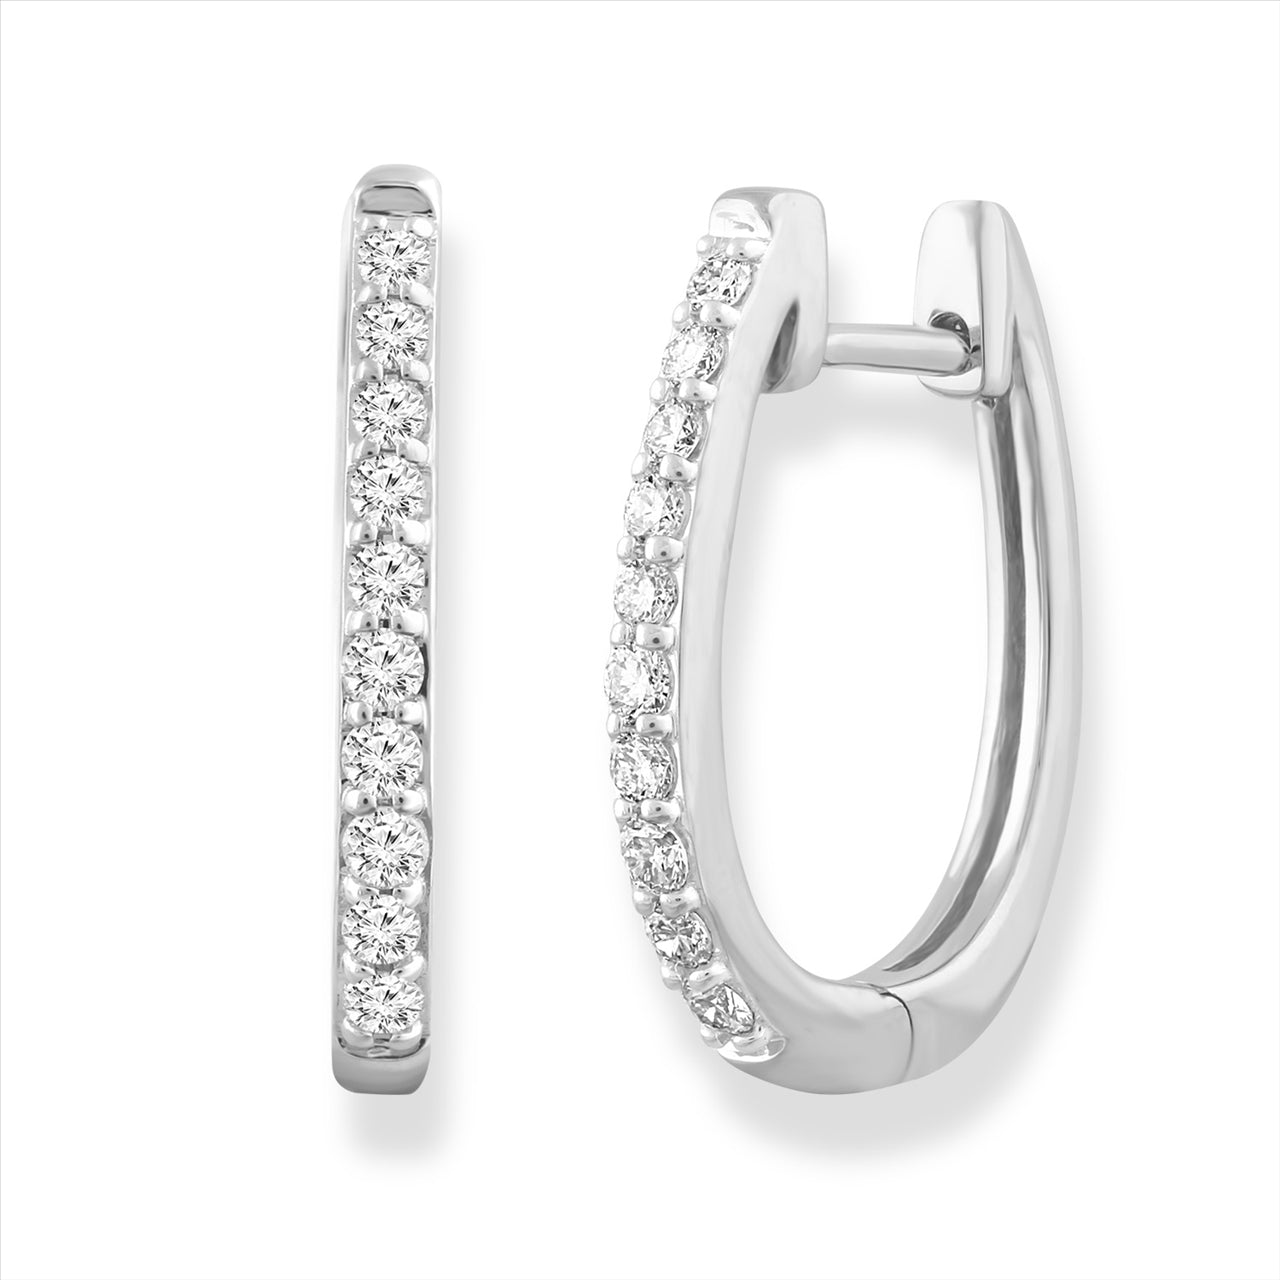 Huggie Earrings with 0.25ct Diamonds in 9K White Gold